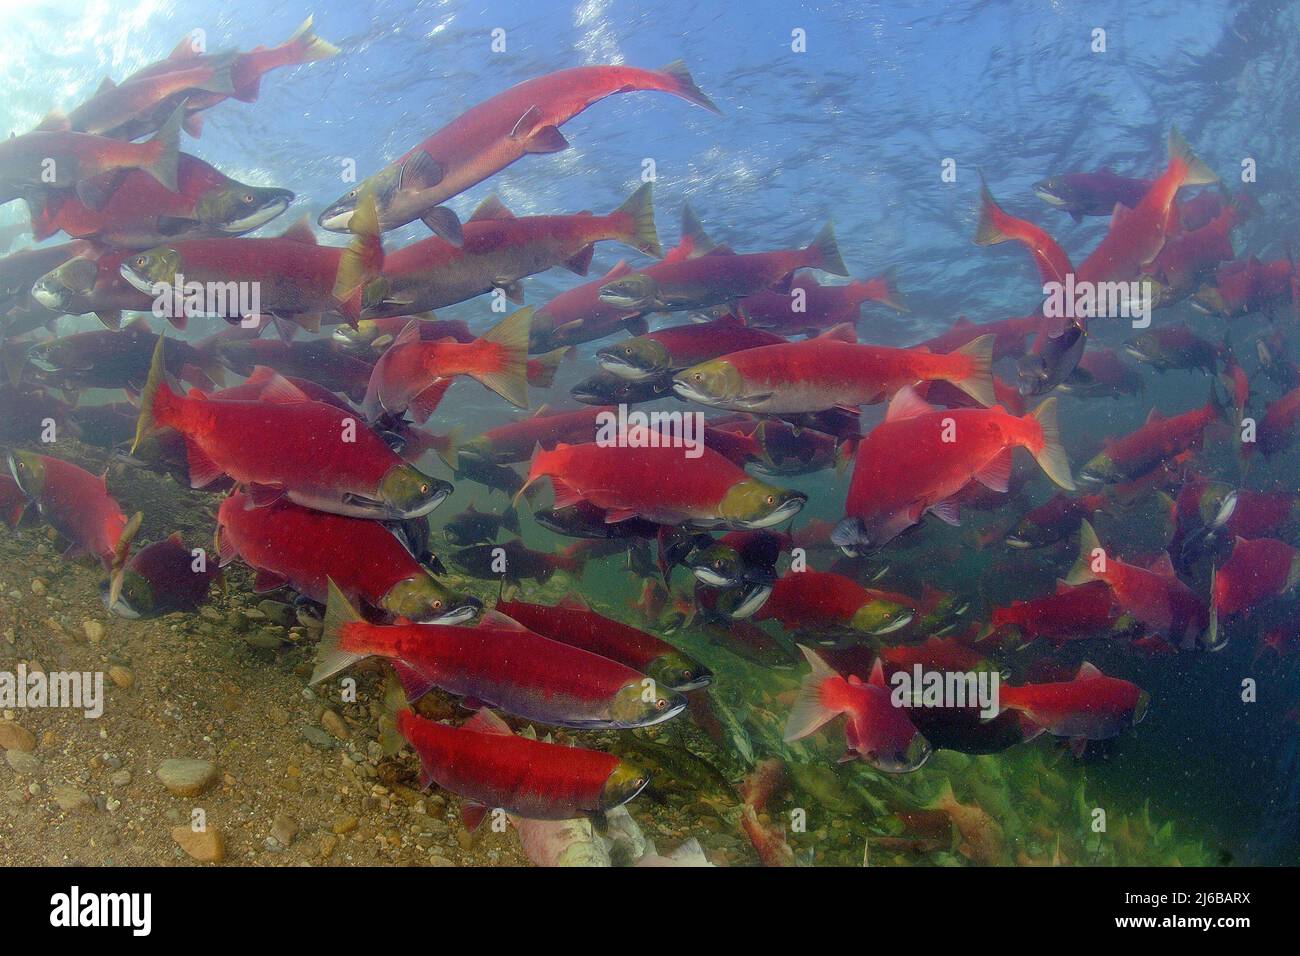 A schooling of Sockeye Salmons (Oncorhynchus nerka), swimming up the Adams River, Roderick Haig-Brown Provincial Park, British Columbia, Canada Stock Photo